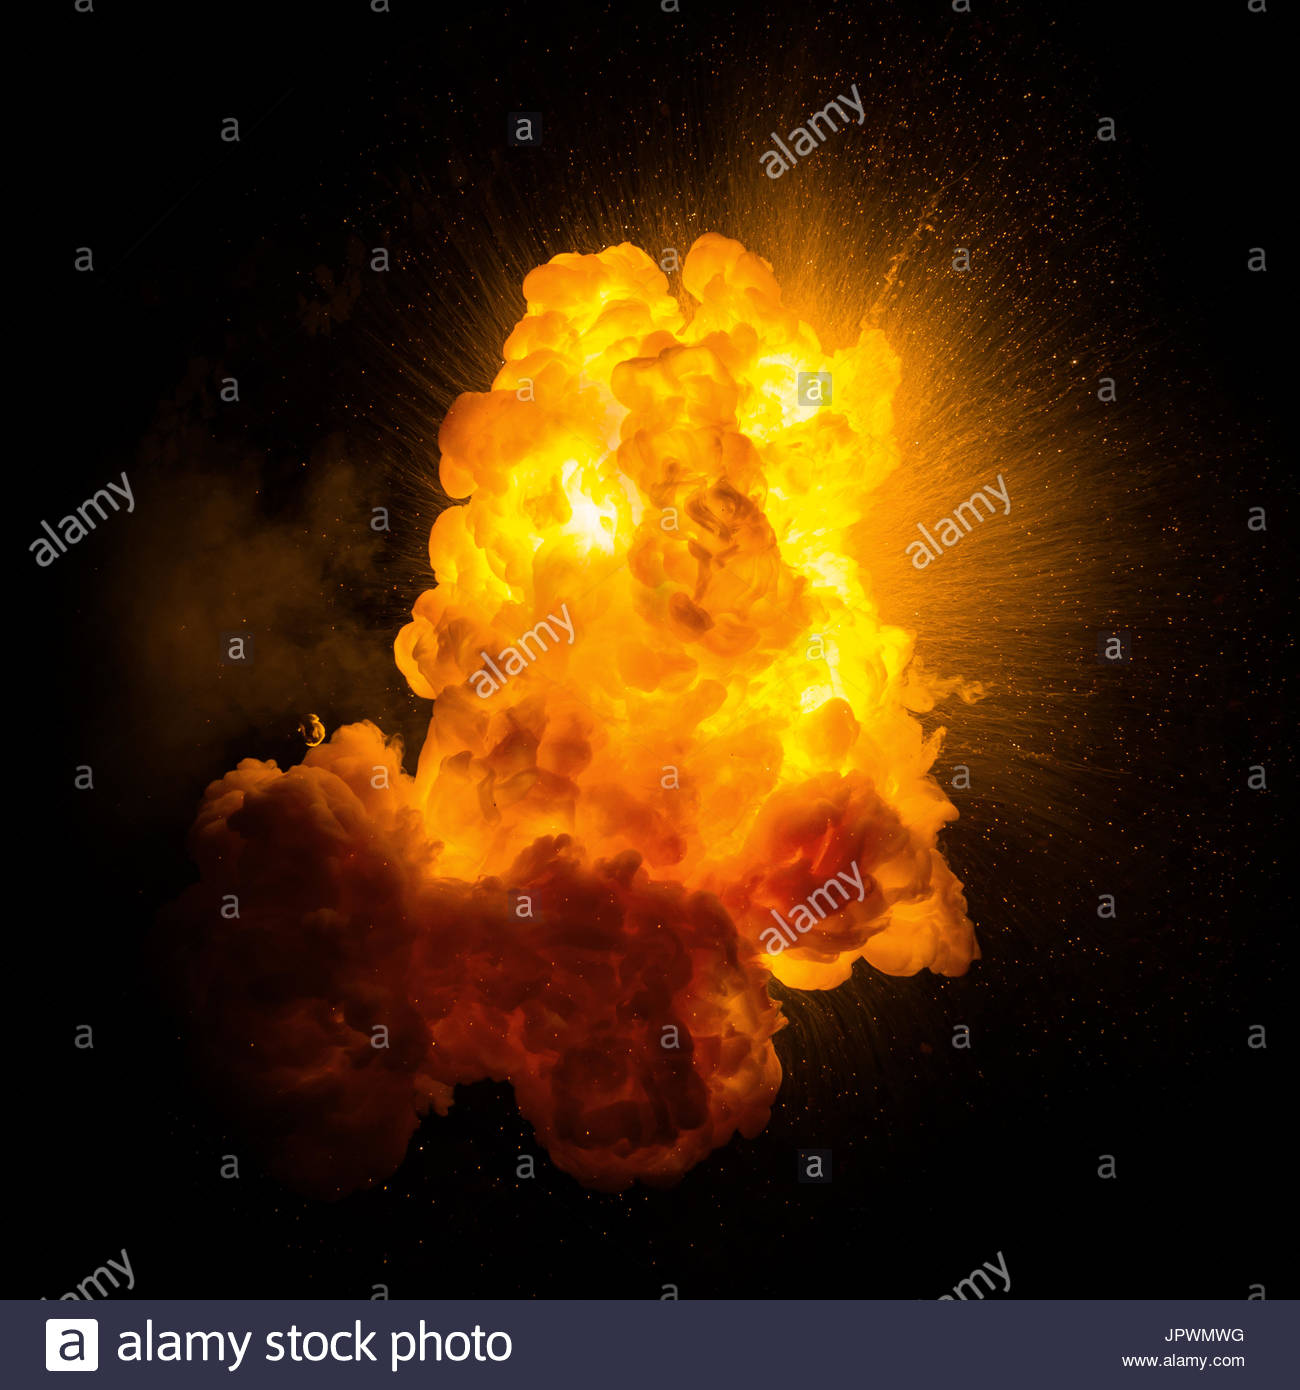 Realistic Fiery Explosion With Sparks Over A Black Background